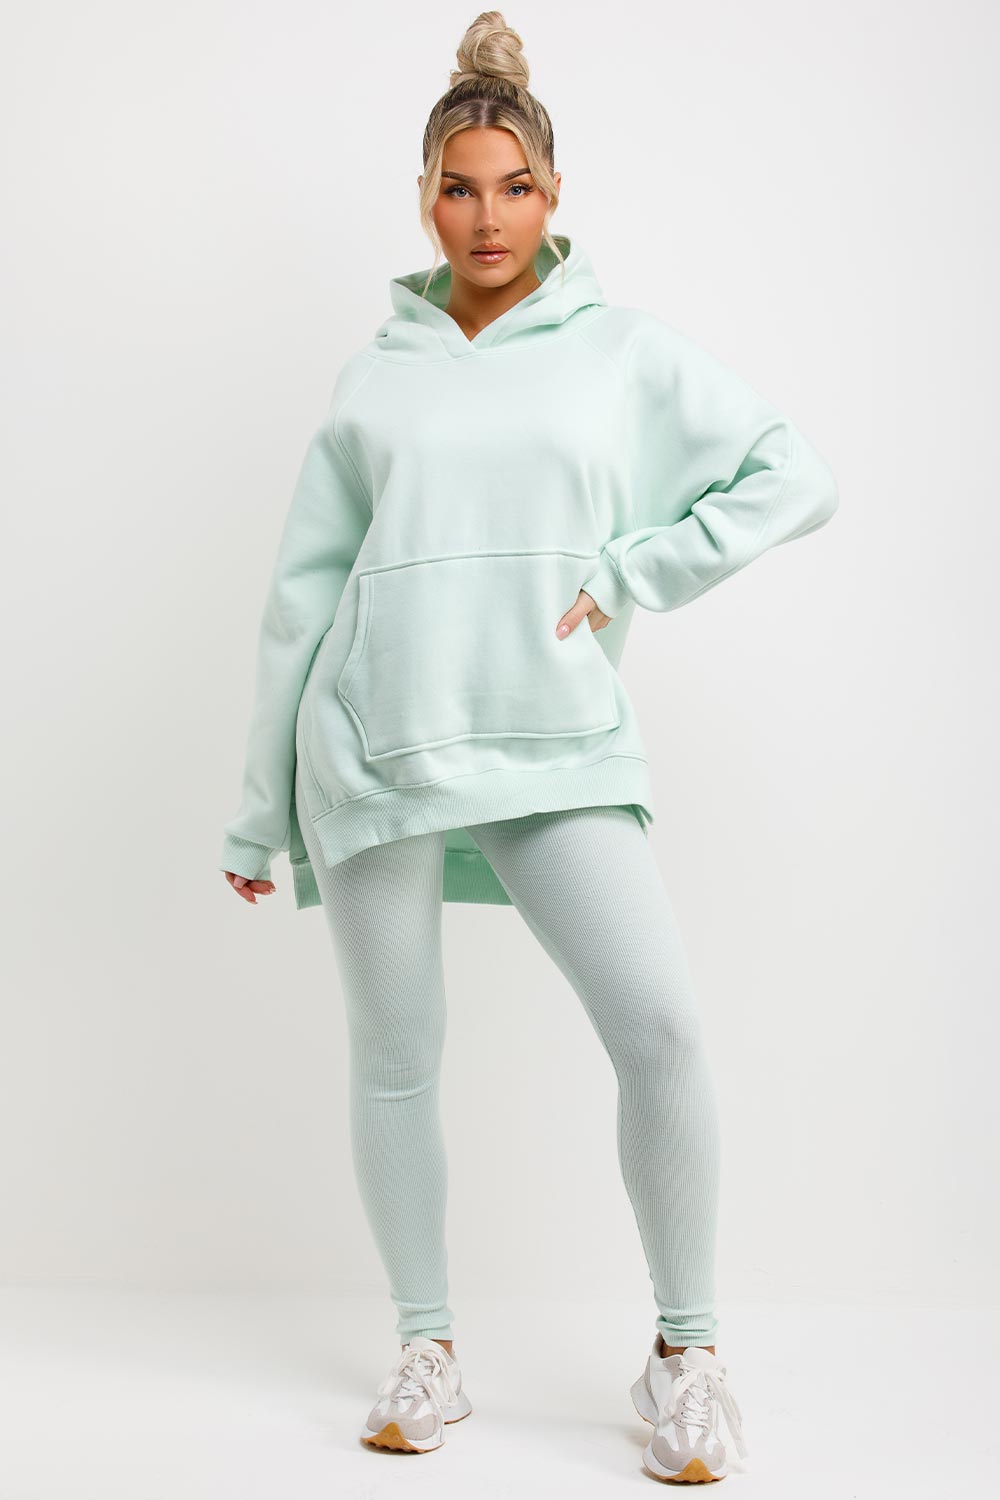 womens oversized hoodie and leggings co ord set